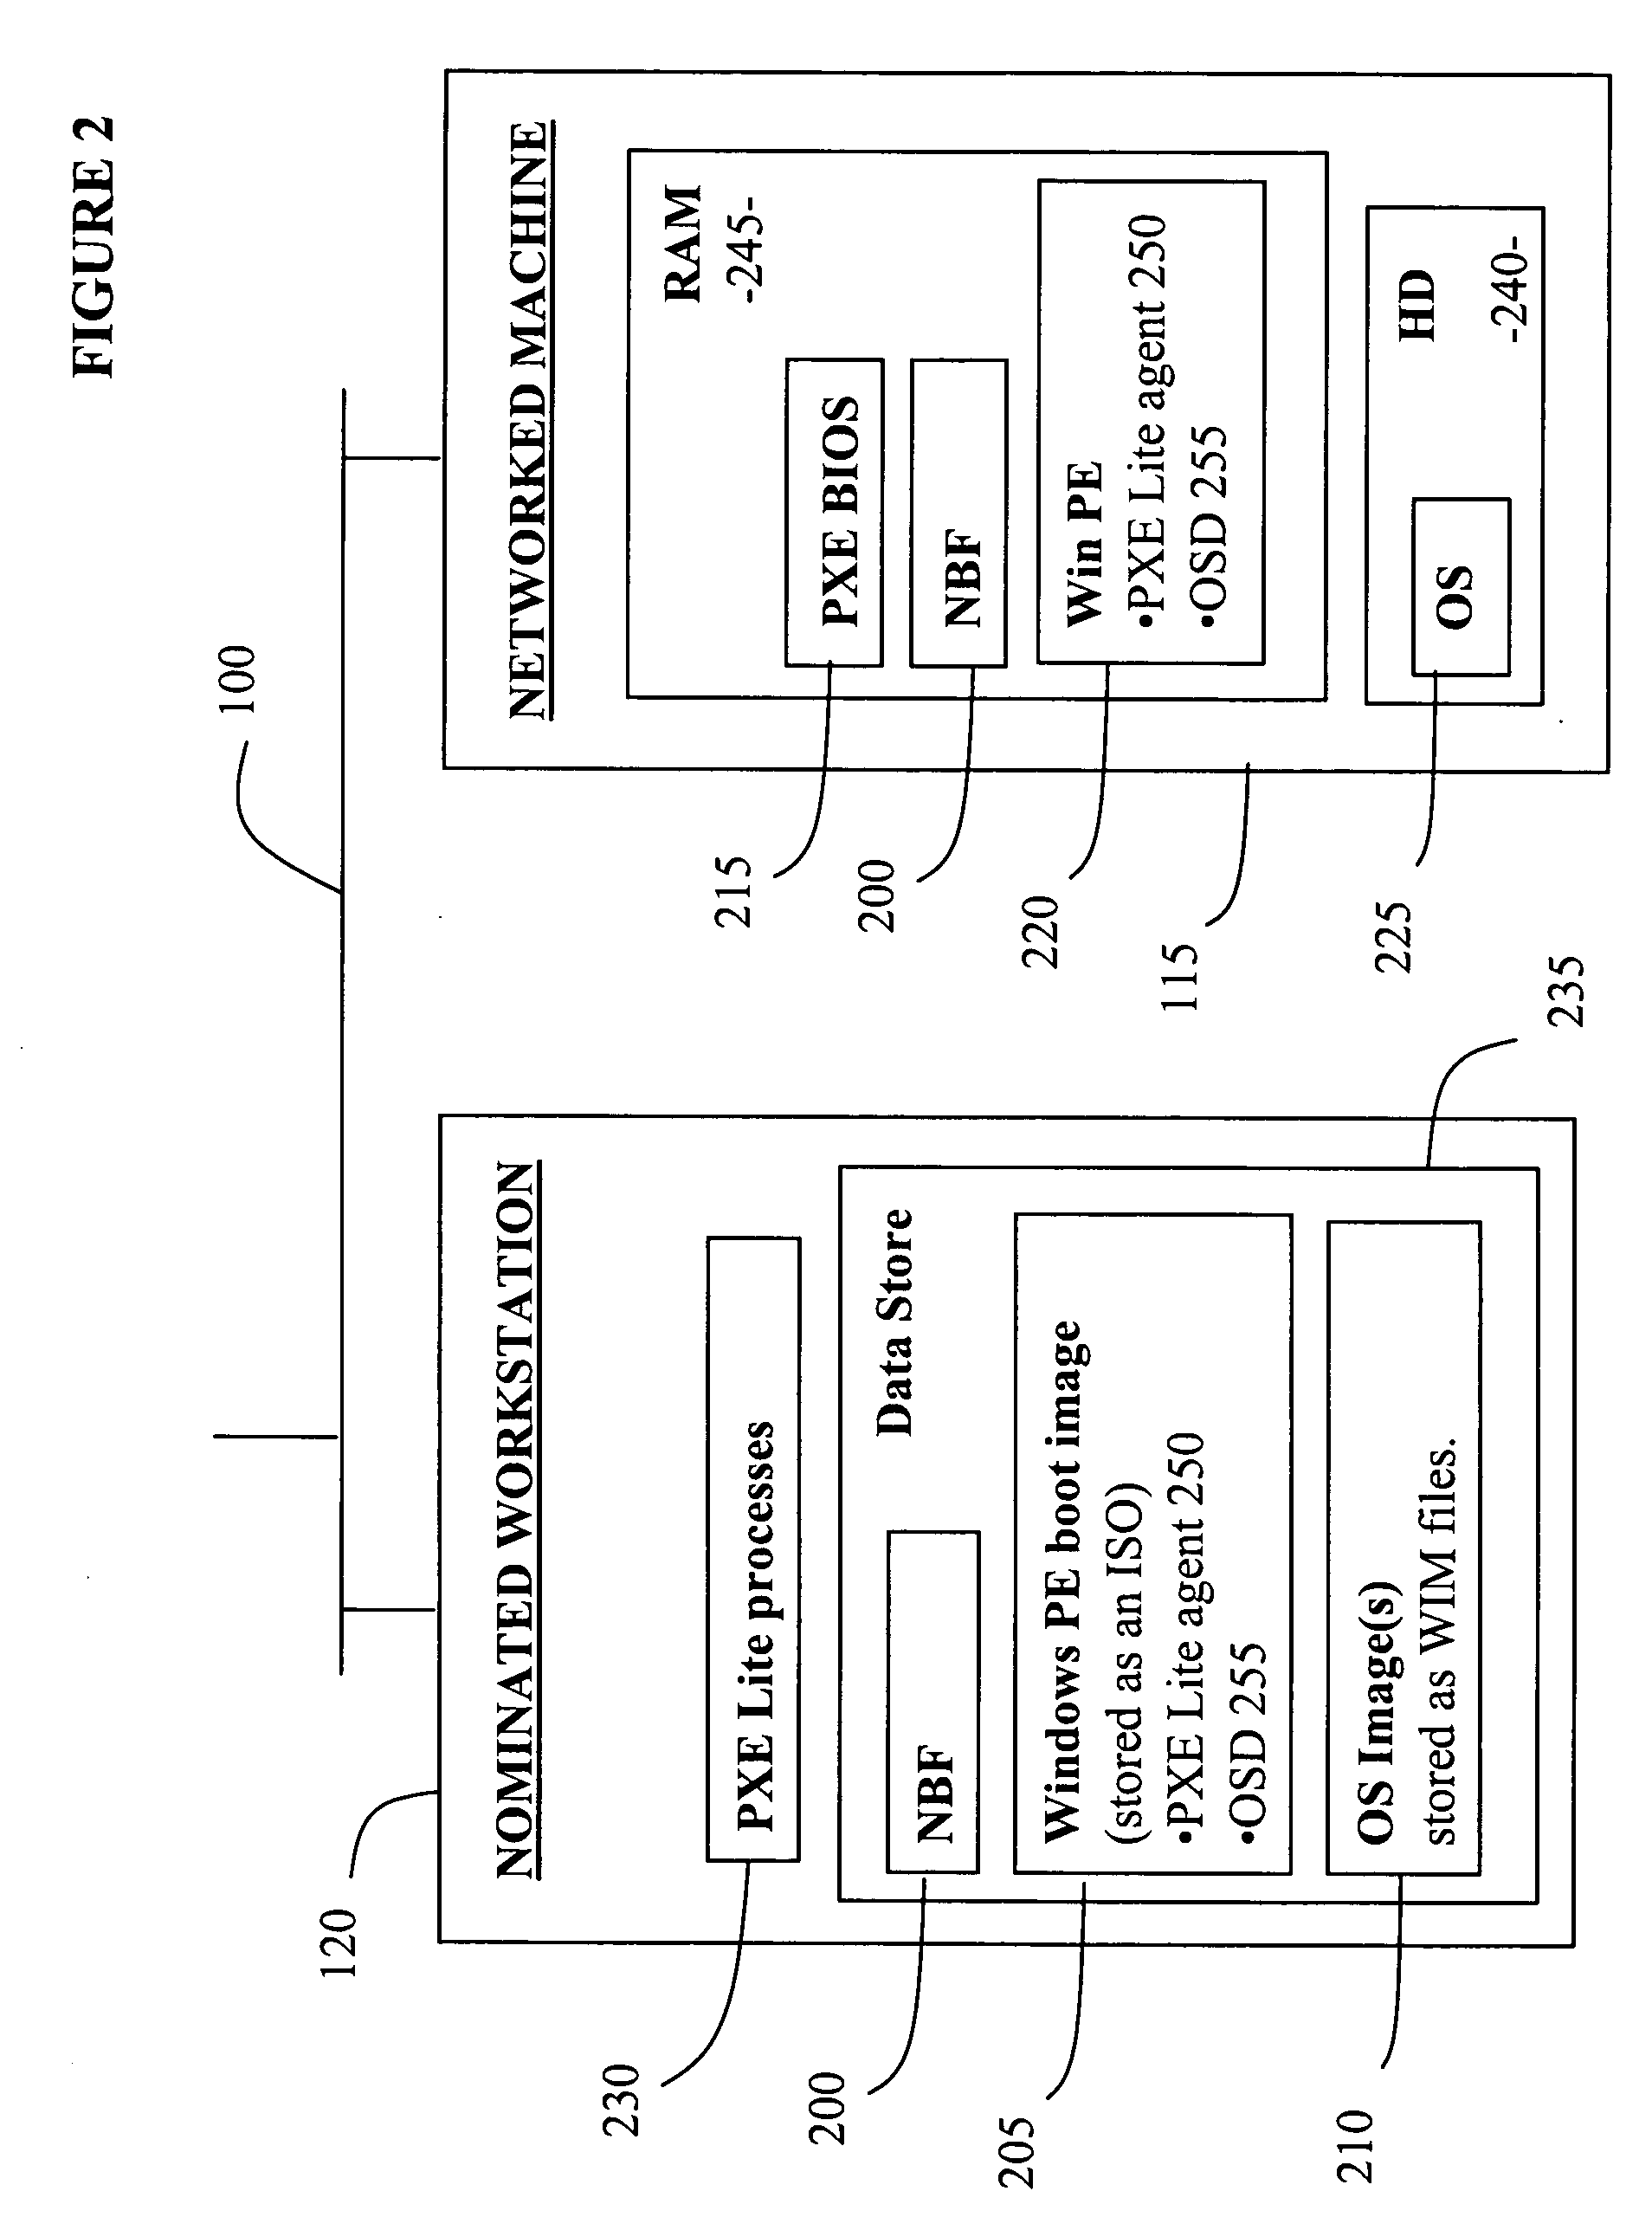 Network booting apparatus and method